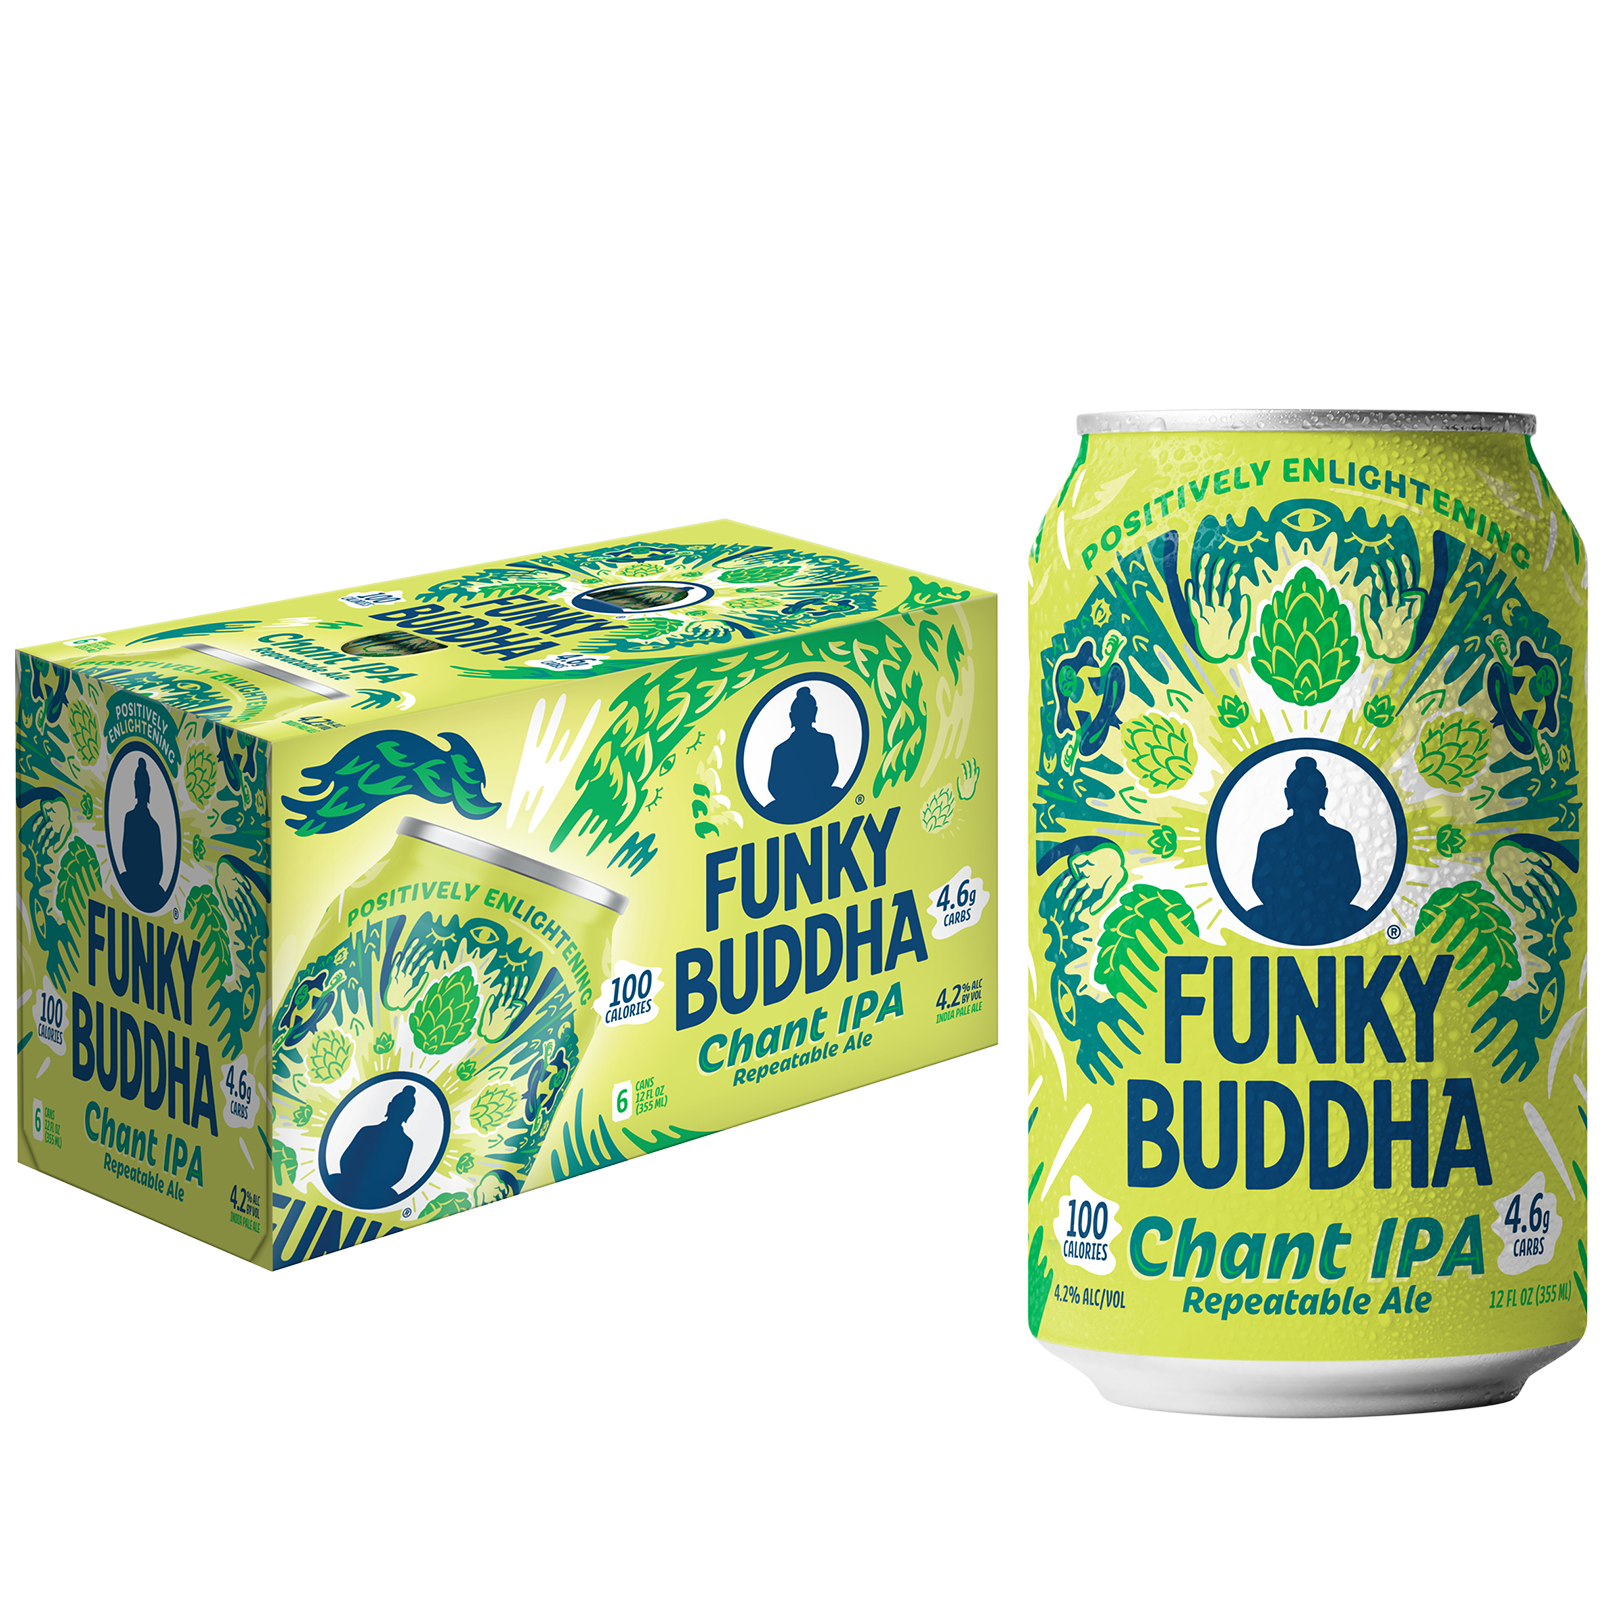 Funky Buddha Chant Session IPA Craft Beer, 6 pk, 12 oz cans, 4.2% ABV